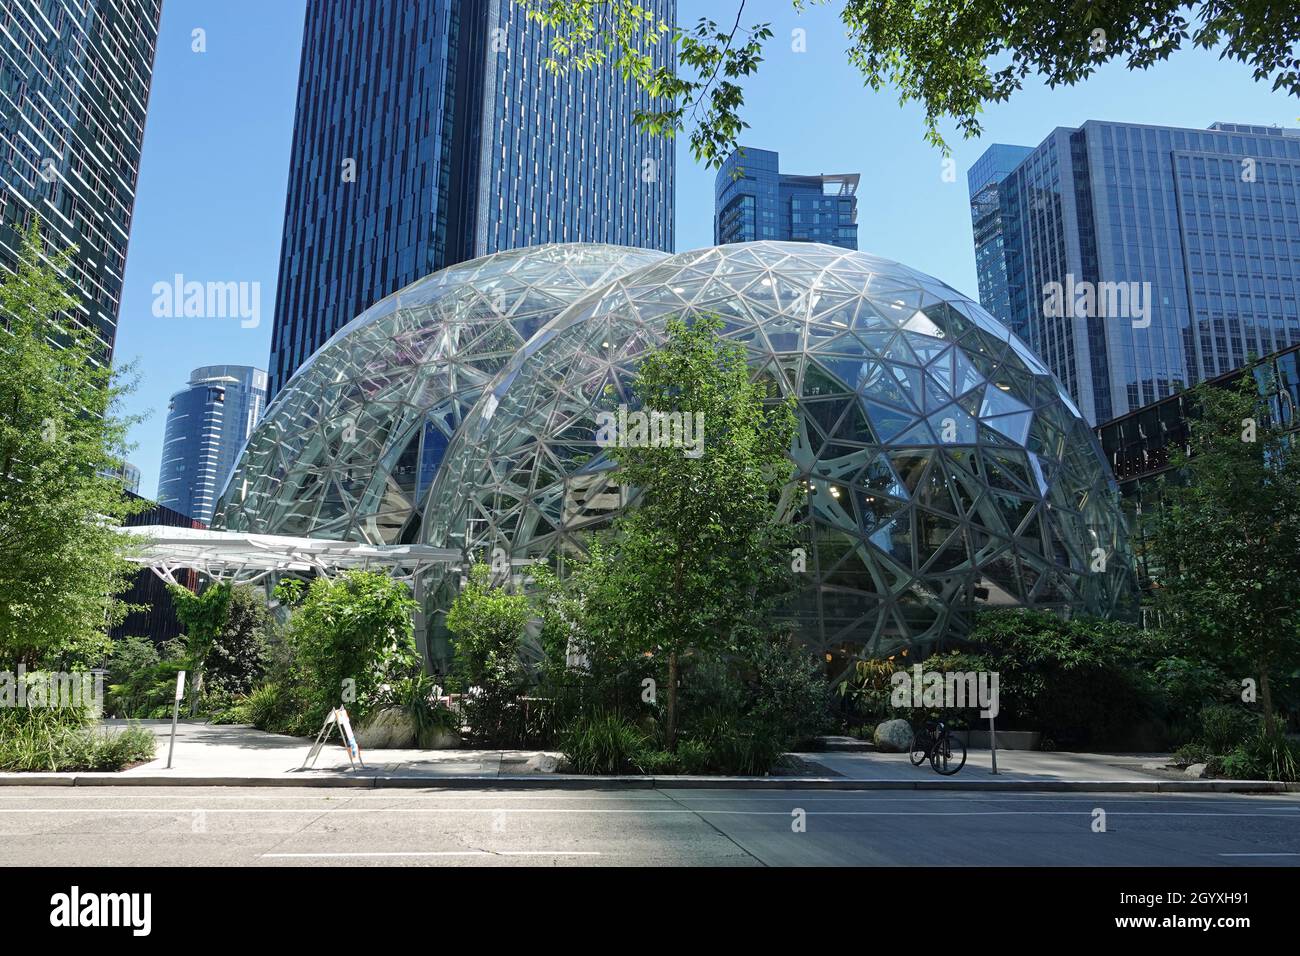 Seattle, WA / USA - June 26, 2021: The ultramodern glass office building known as the Amazon Spheres (or Seattle Spheres) is shown during the day. Stock Photo